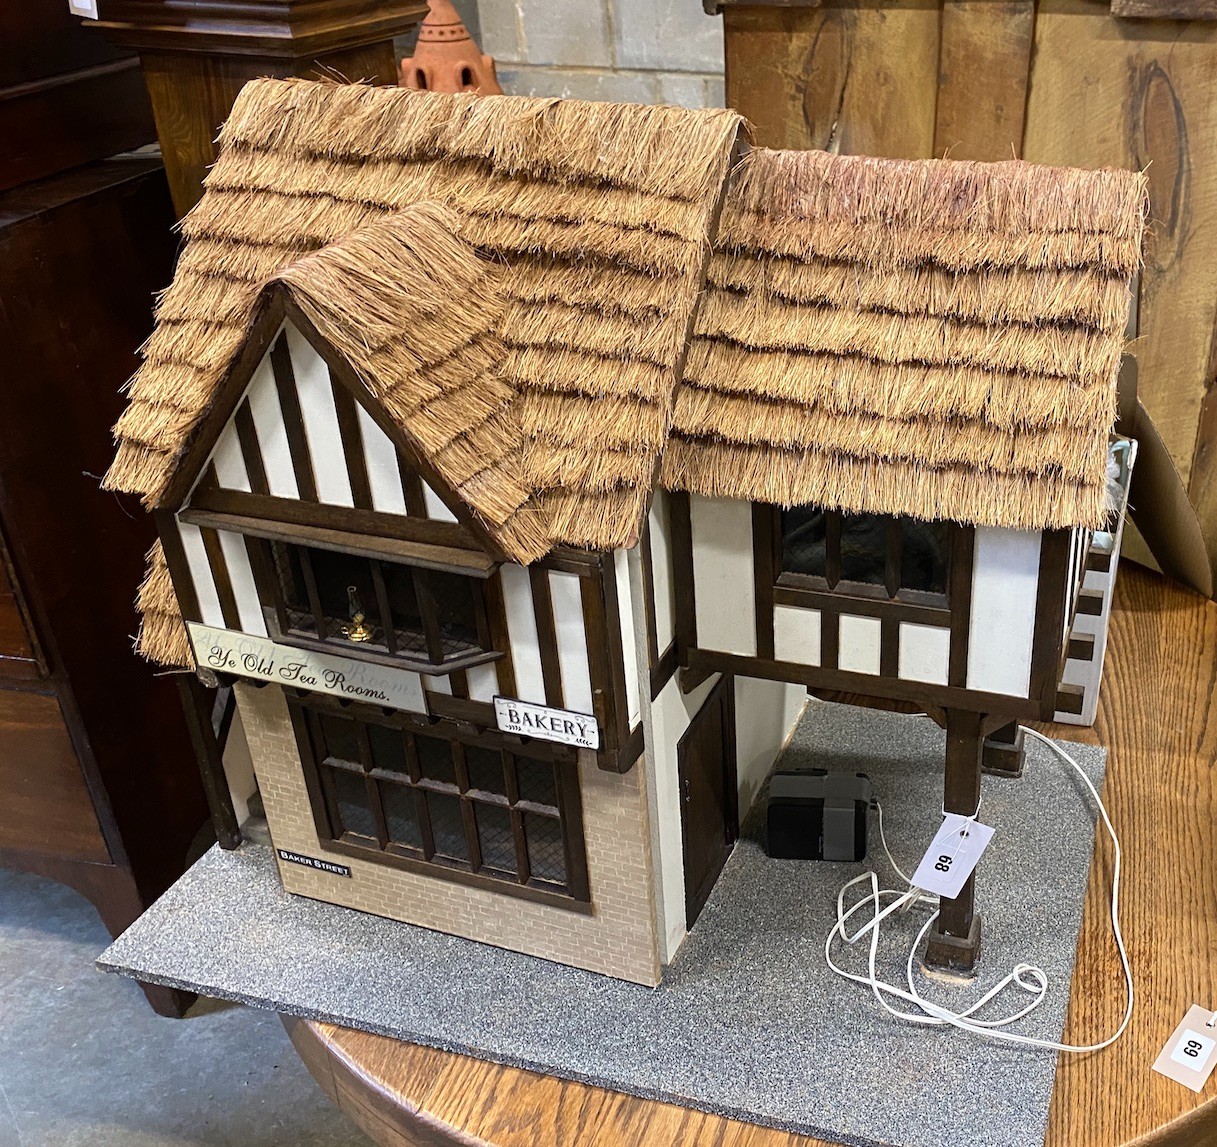 A contemporary doll's house modelled as a thatched house with accompanying furniture, width 70cm, height 60cm